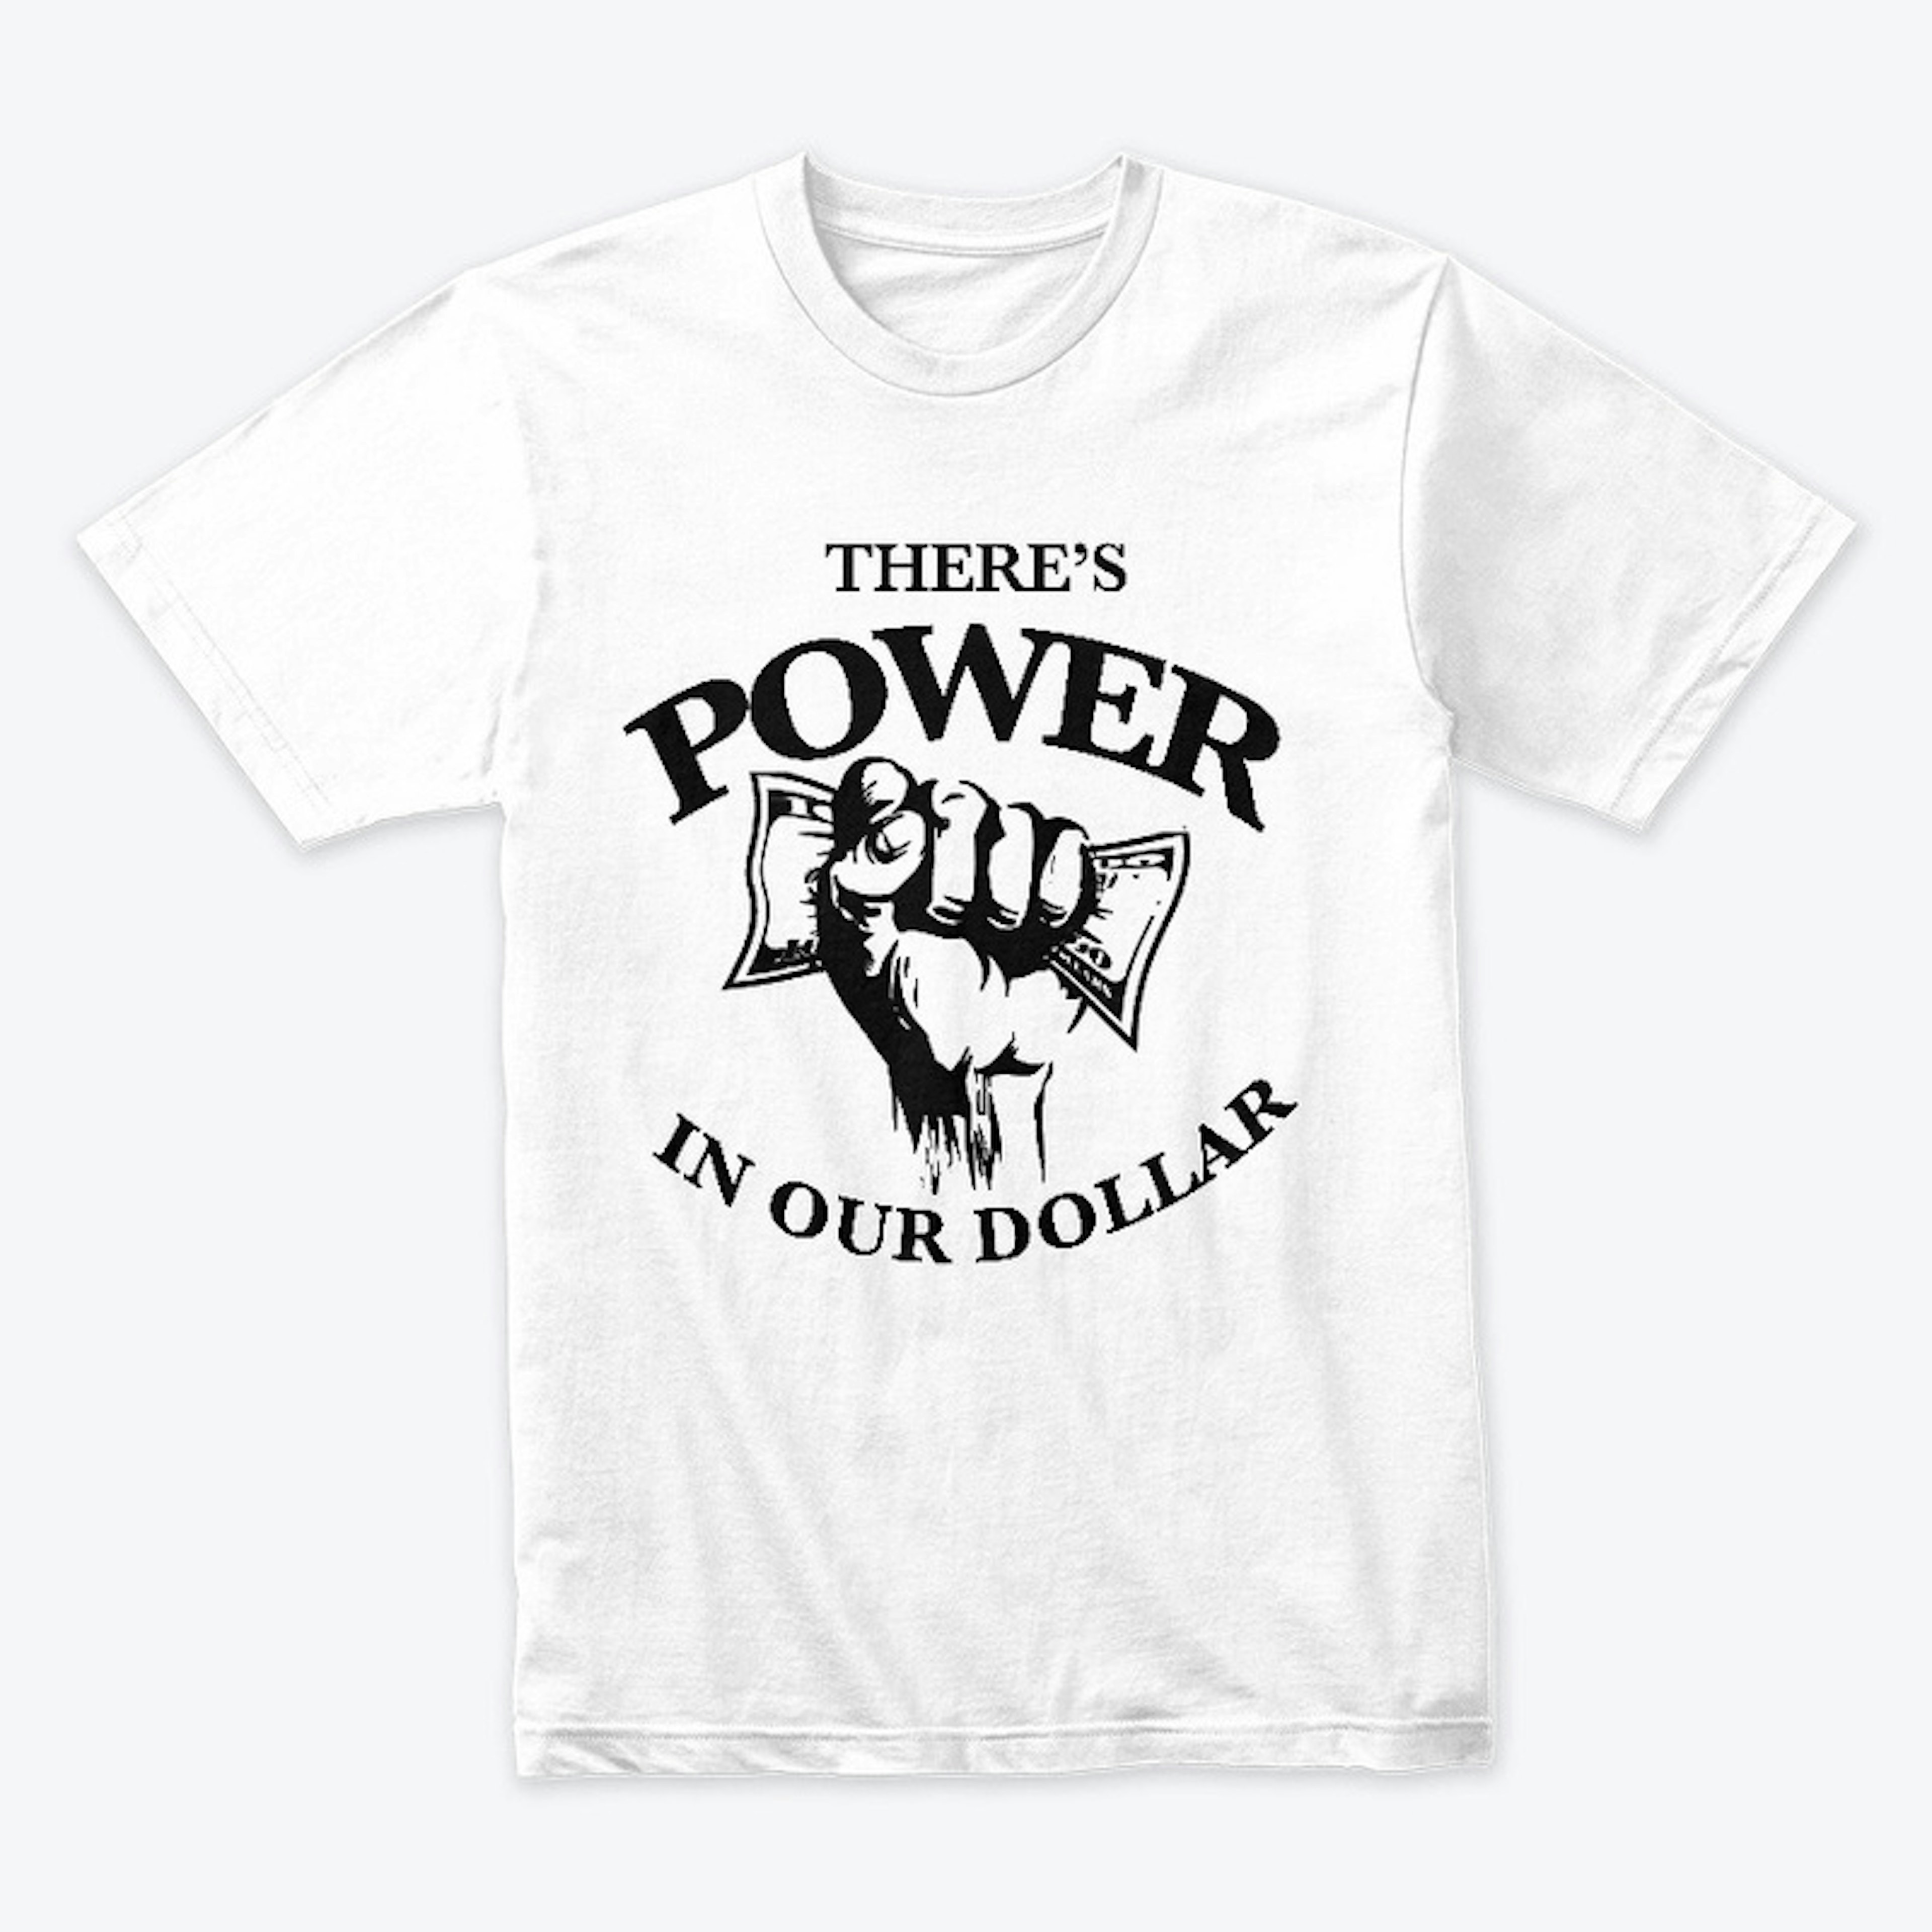 There's Power In Our Dollar